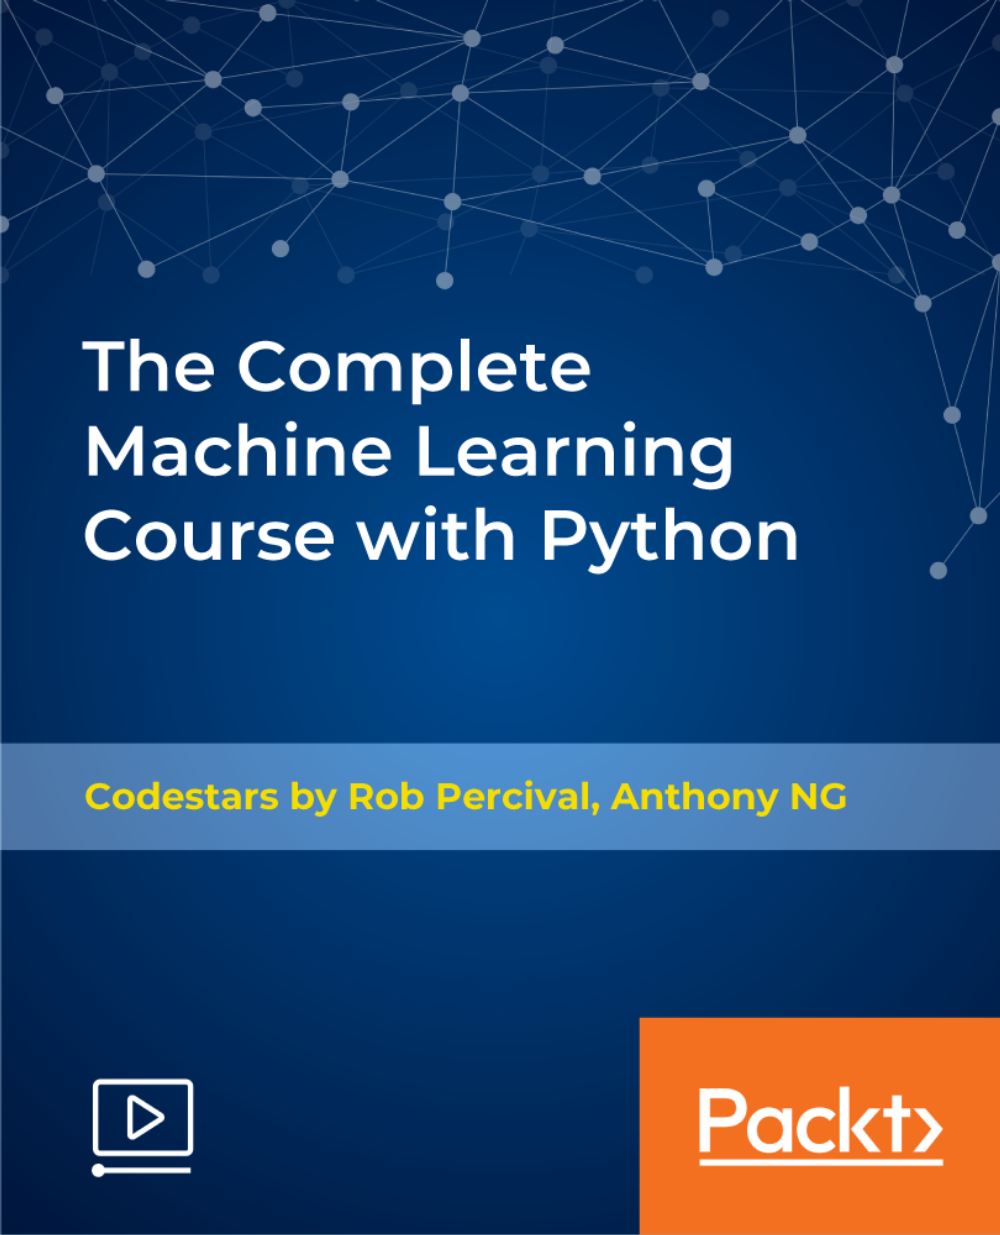 The Complete Machine Learning Course with Python